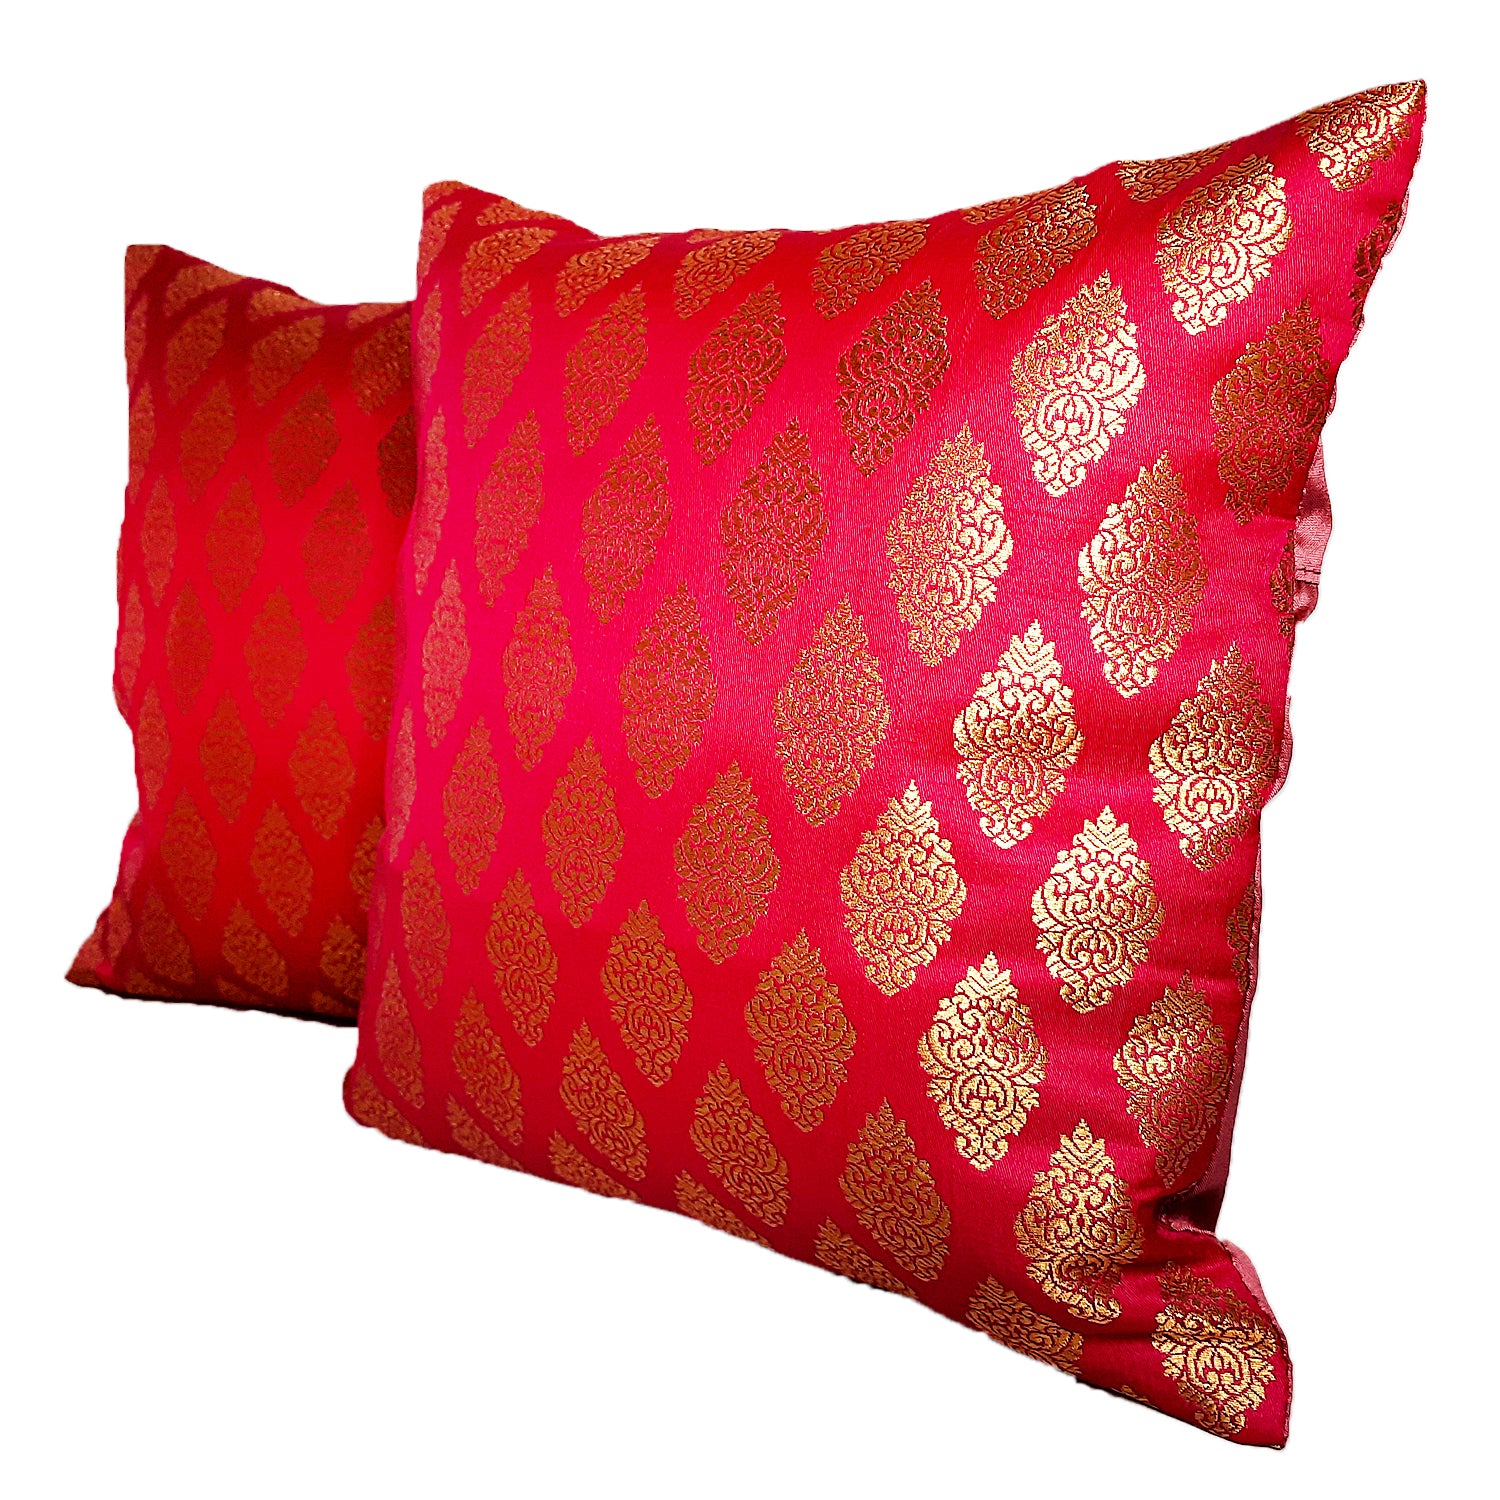 The Bombay Store Bolster with Brocade Patch Cushion Cover